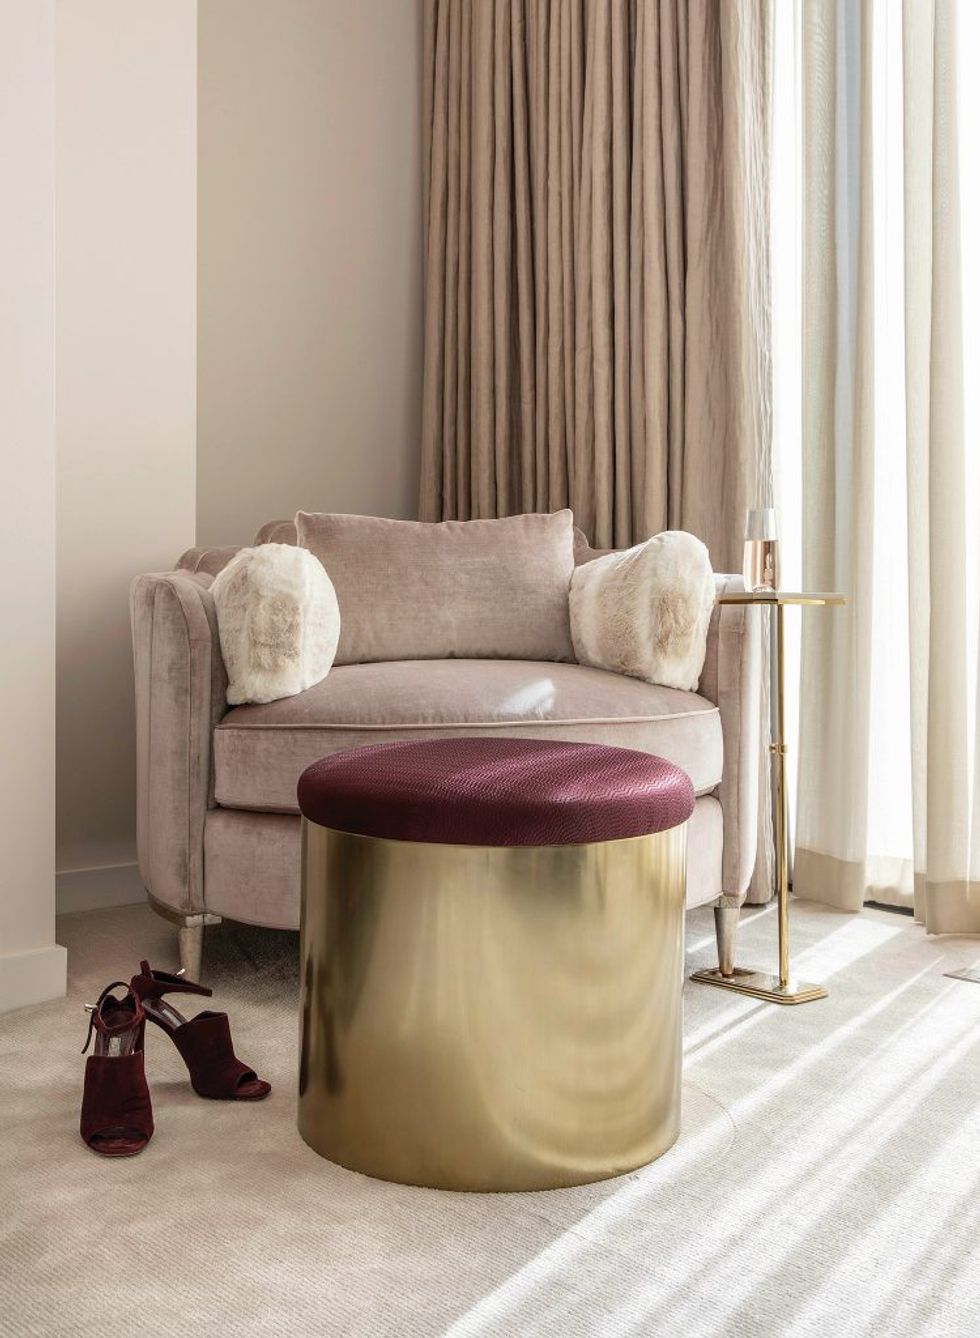 Designer Laura Umansky’s favorite touch — a rounded chair by Caracole near the window.